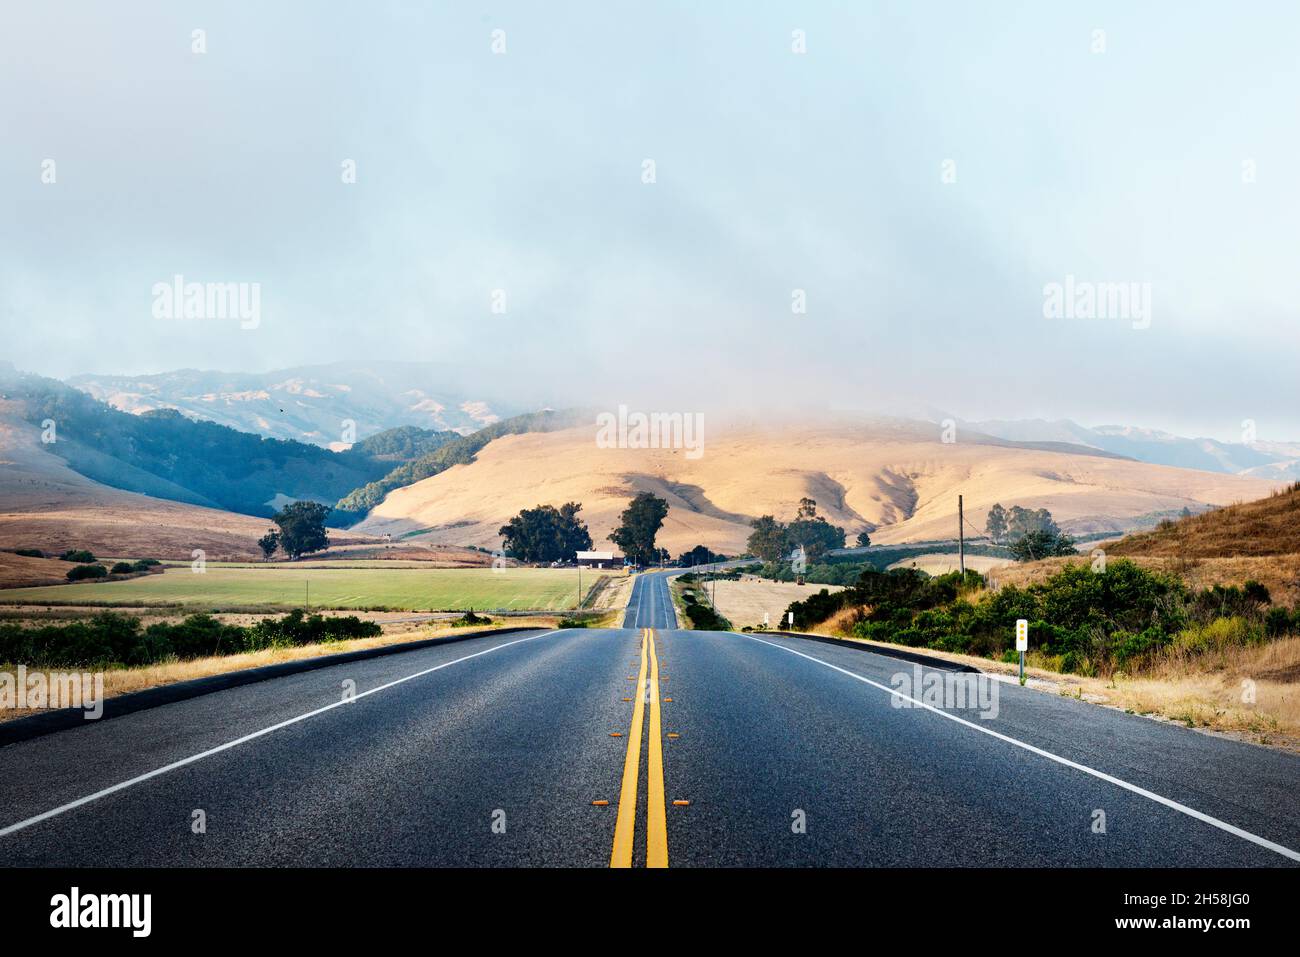 Beautiful scenics along Route 46 in California. State Route 46. Old Mammoth Road. Original image from Carol M. Highsmith’s America, Library of Congres Stock Photo